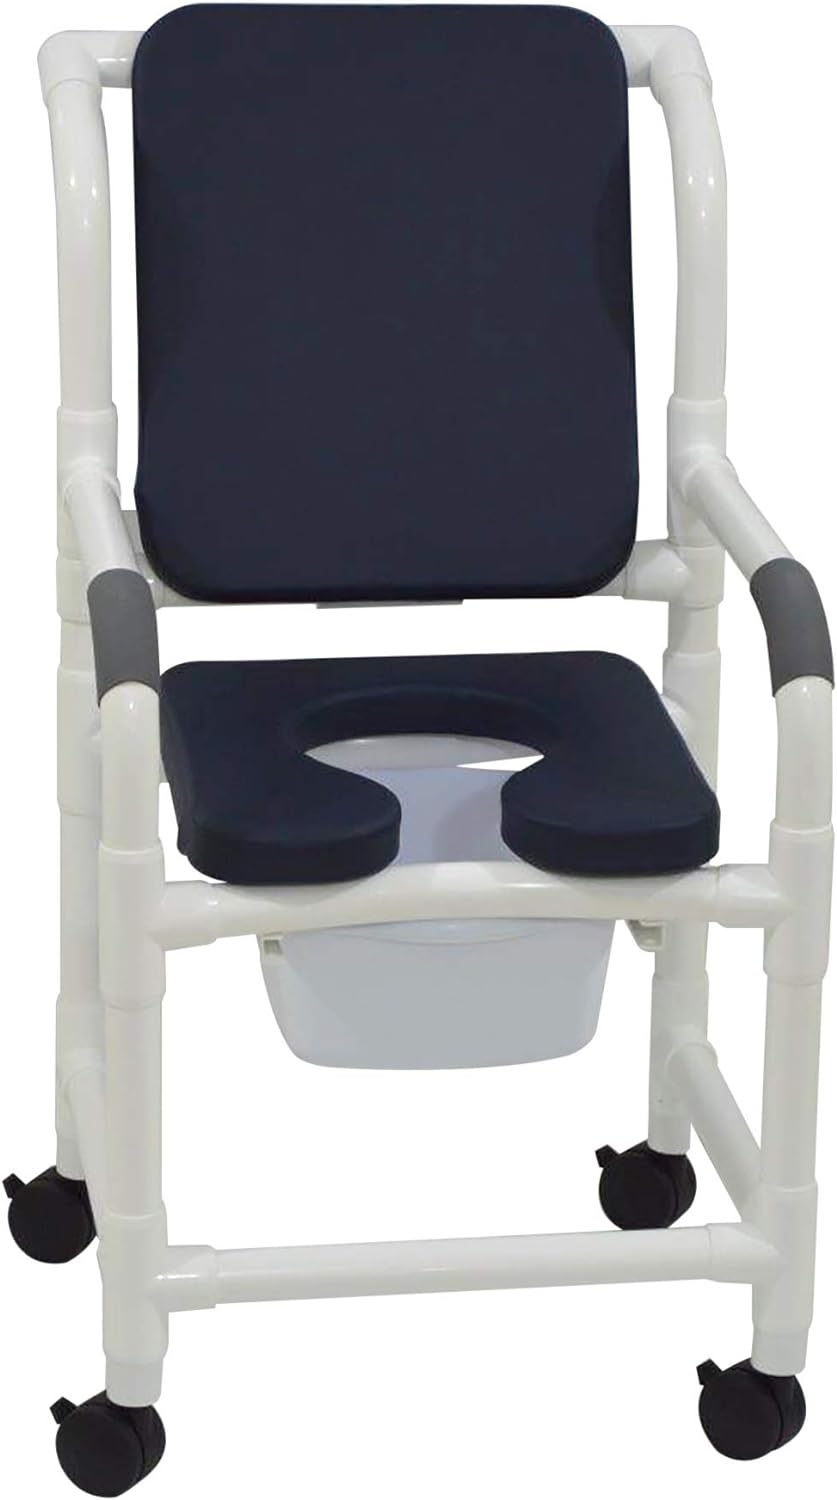 MJM International Corp. Shower chair 18Inch internal width 3Inch twin casters ADMIRAL BLUE deluxe elongated open front soft seat ADMIRAL BLUE cushion pa